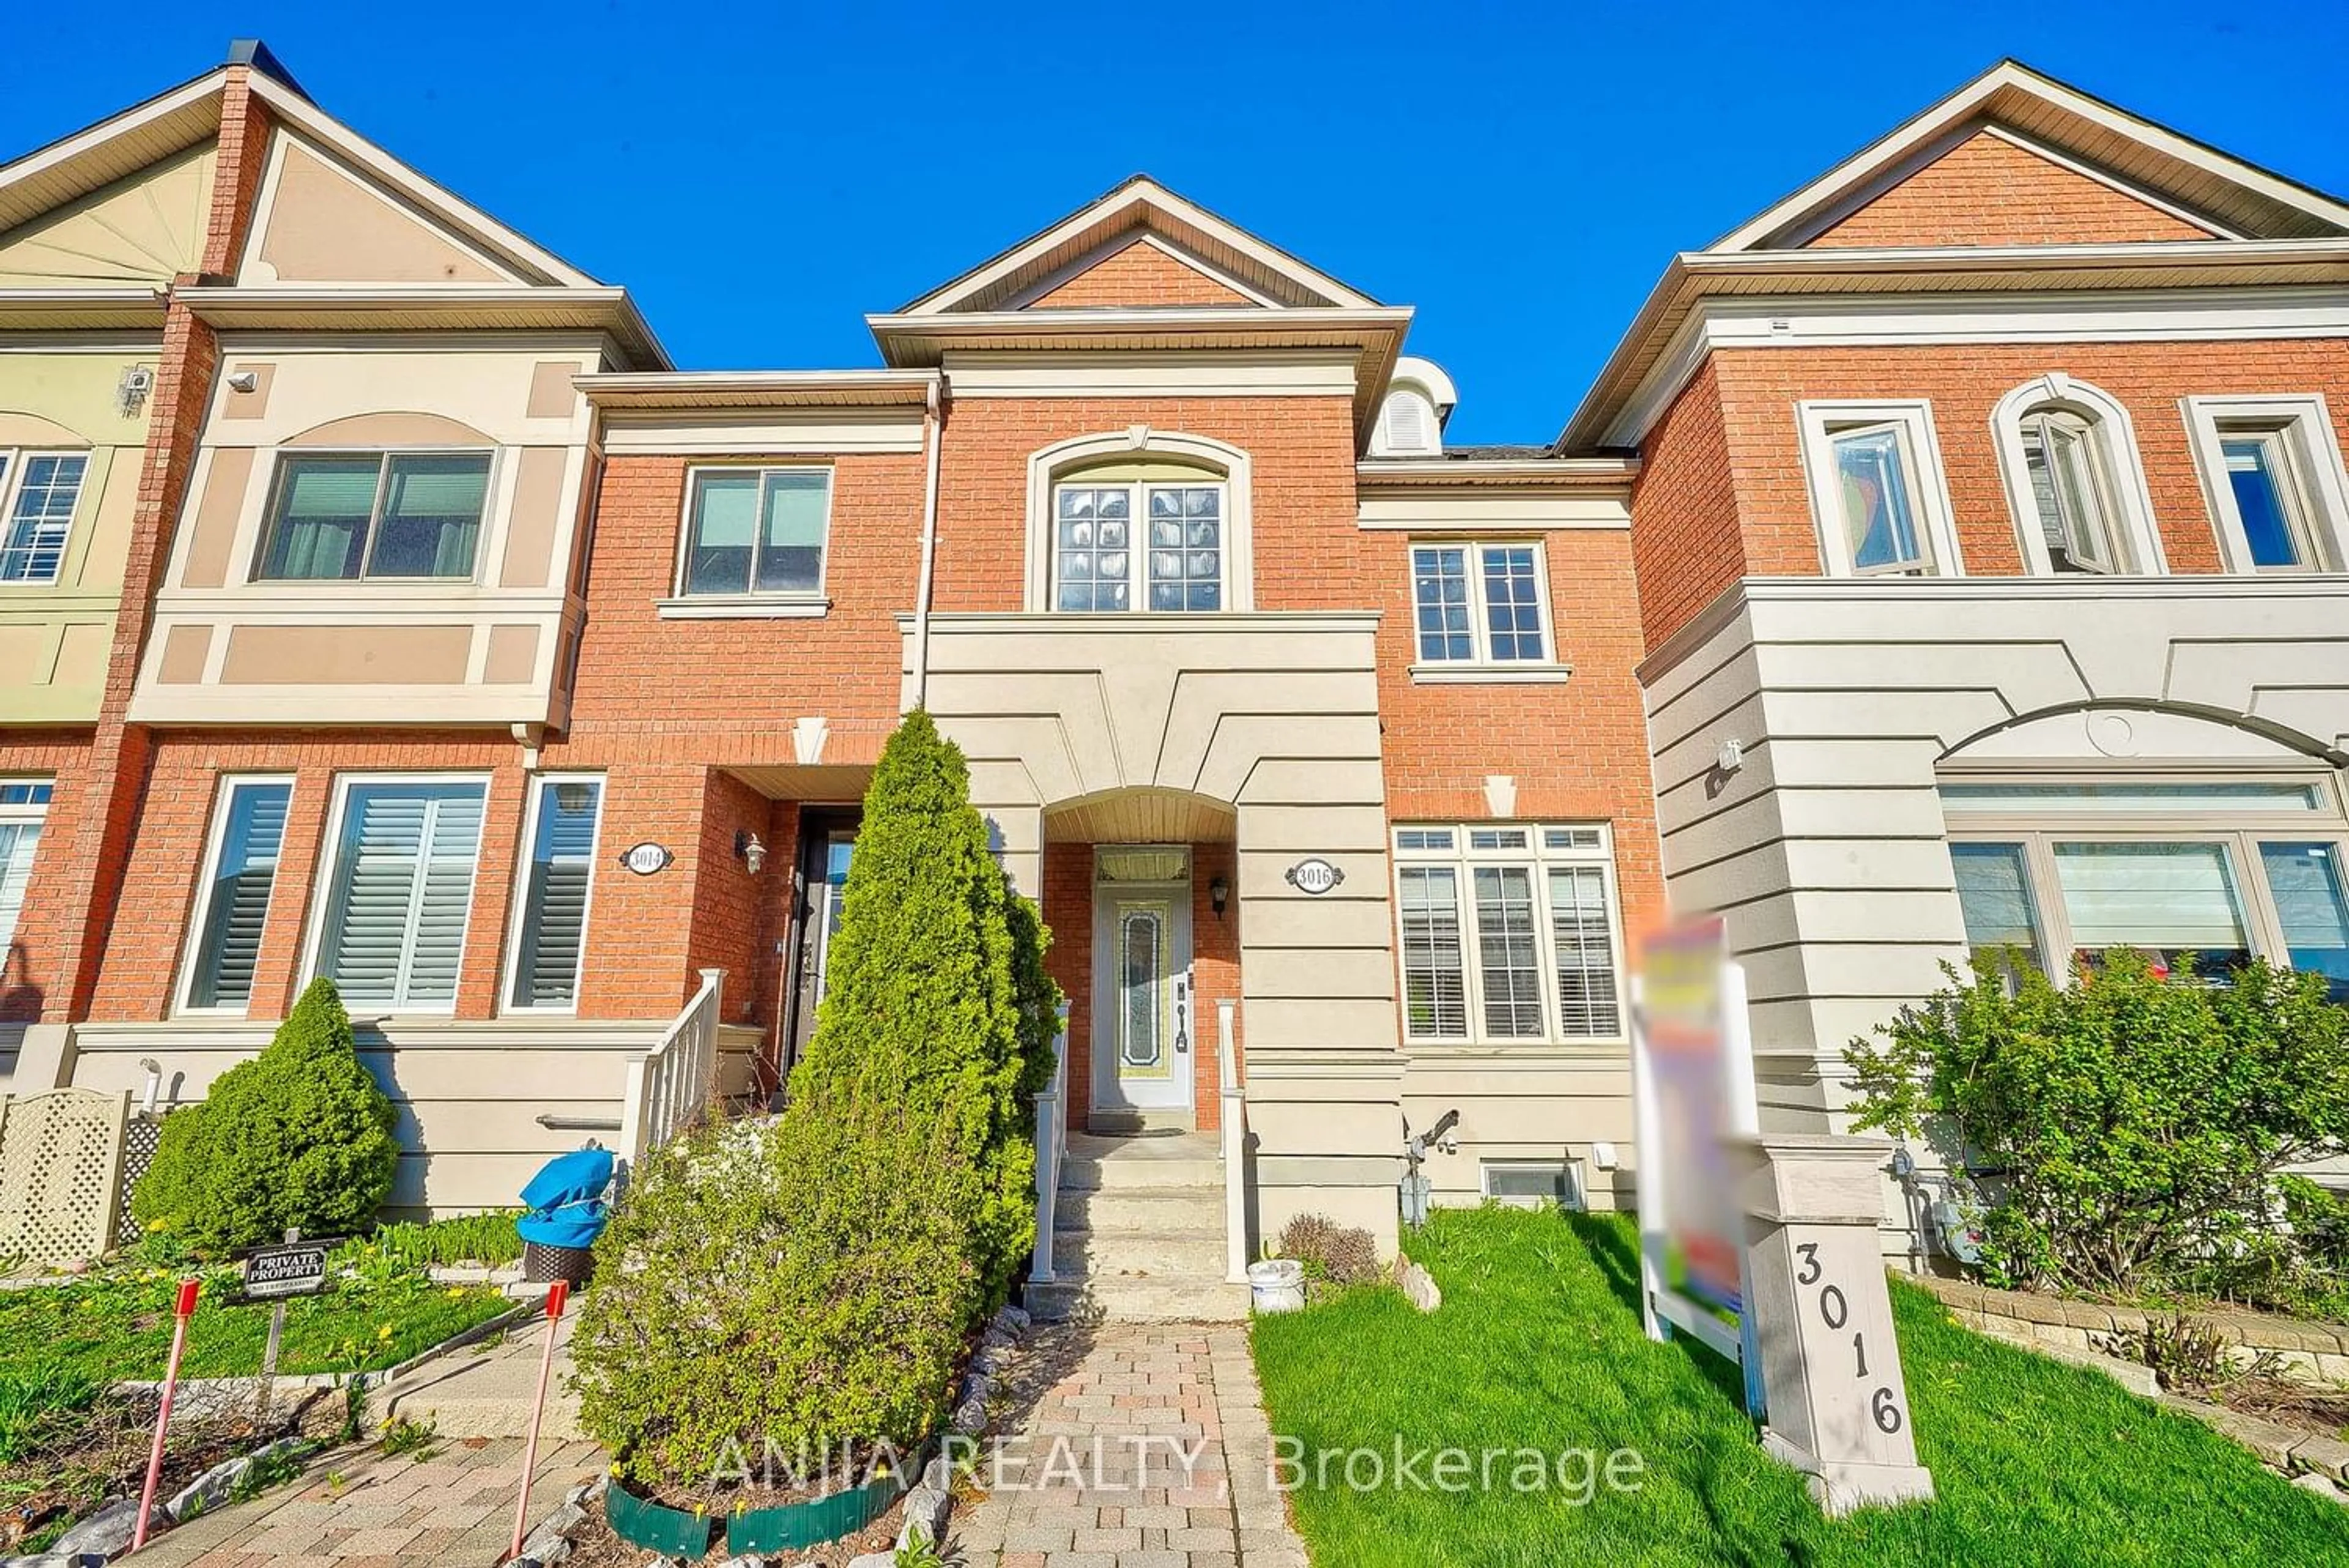 A pic from exterior of the house or condo for 3016 Bur Oak Ave, Markham Ontario L6B 1E3